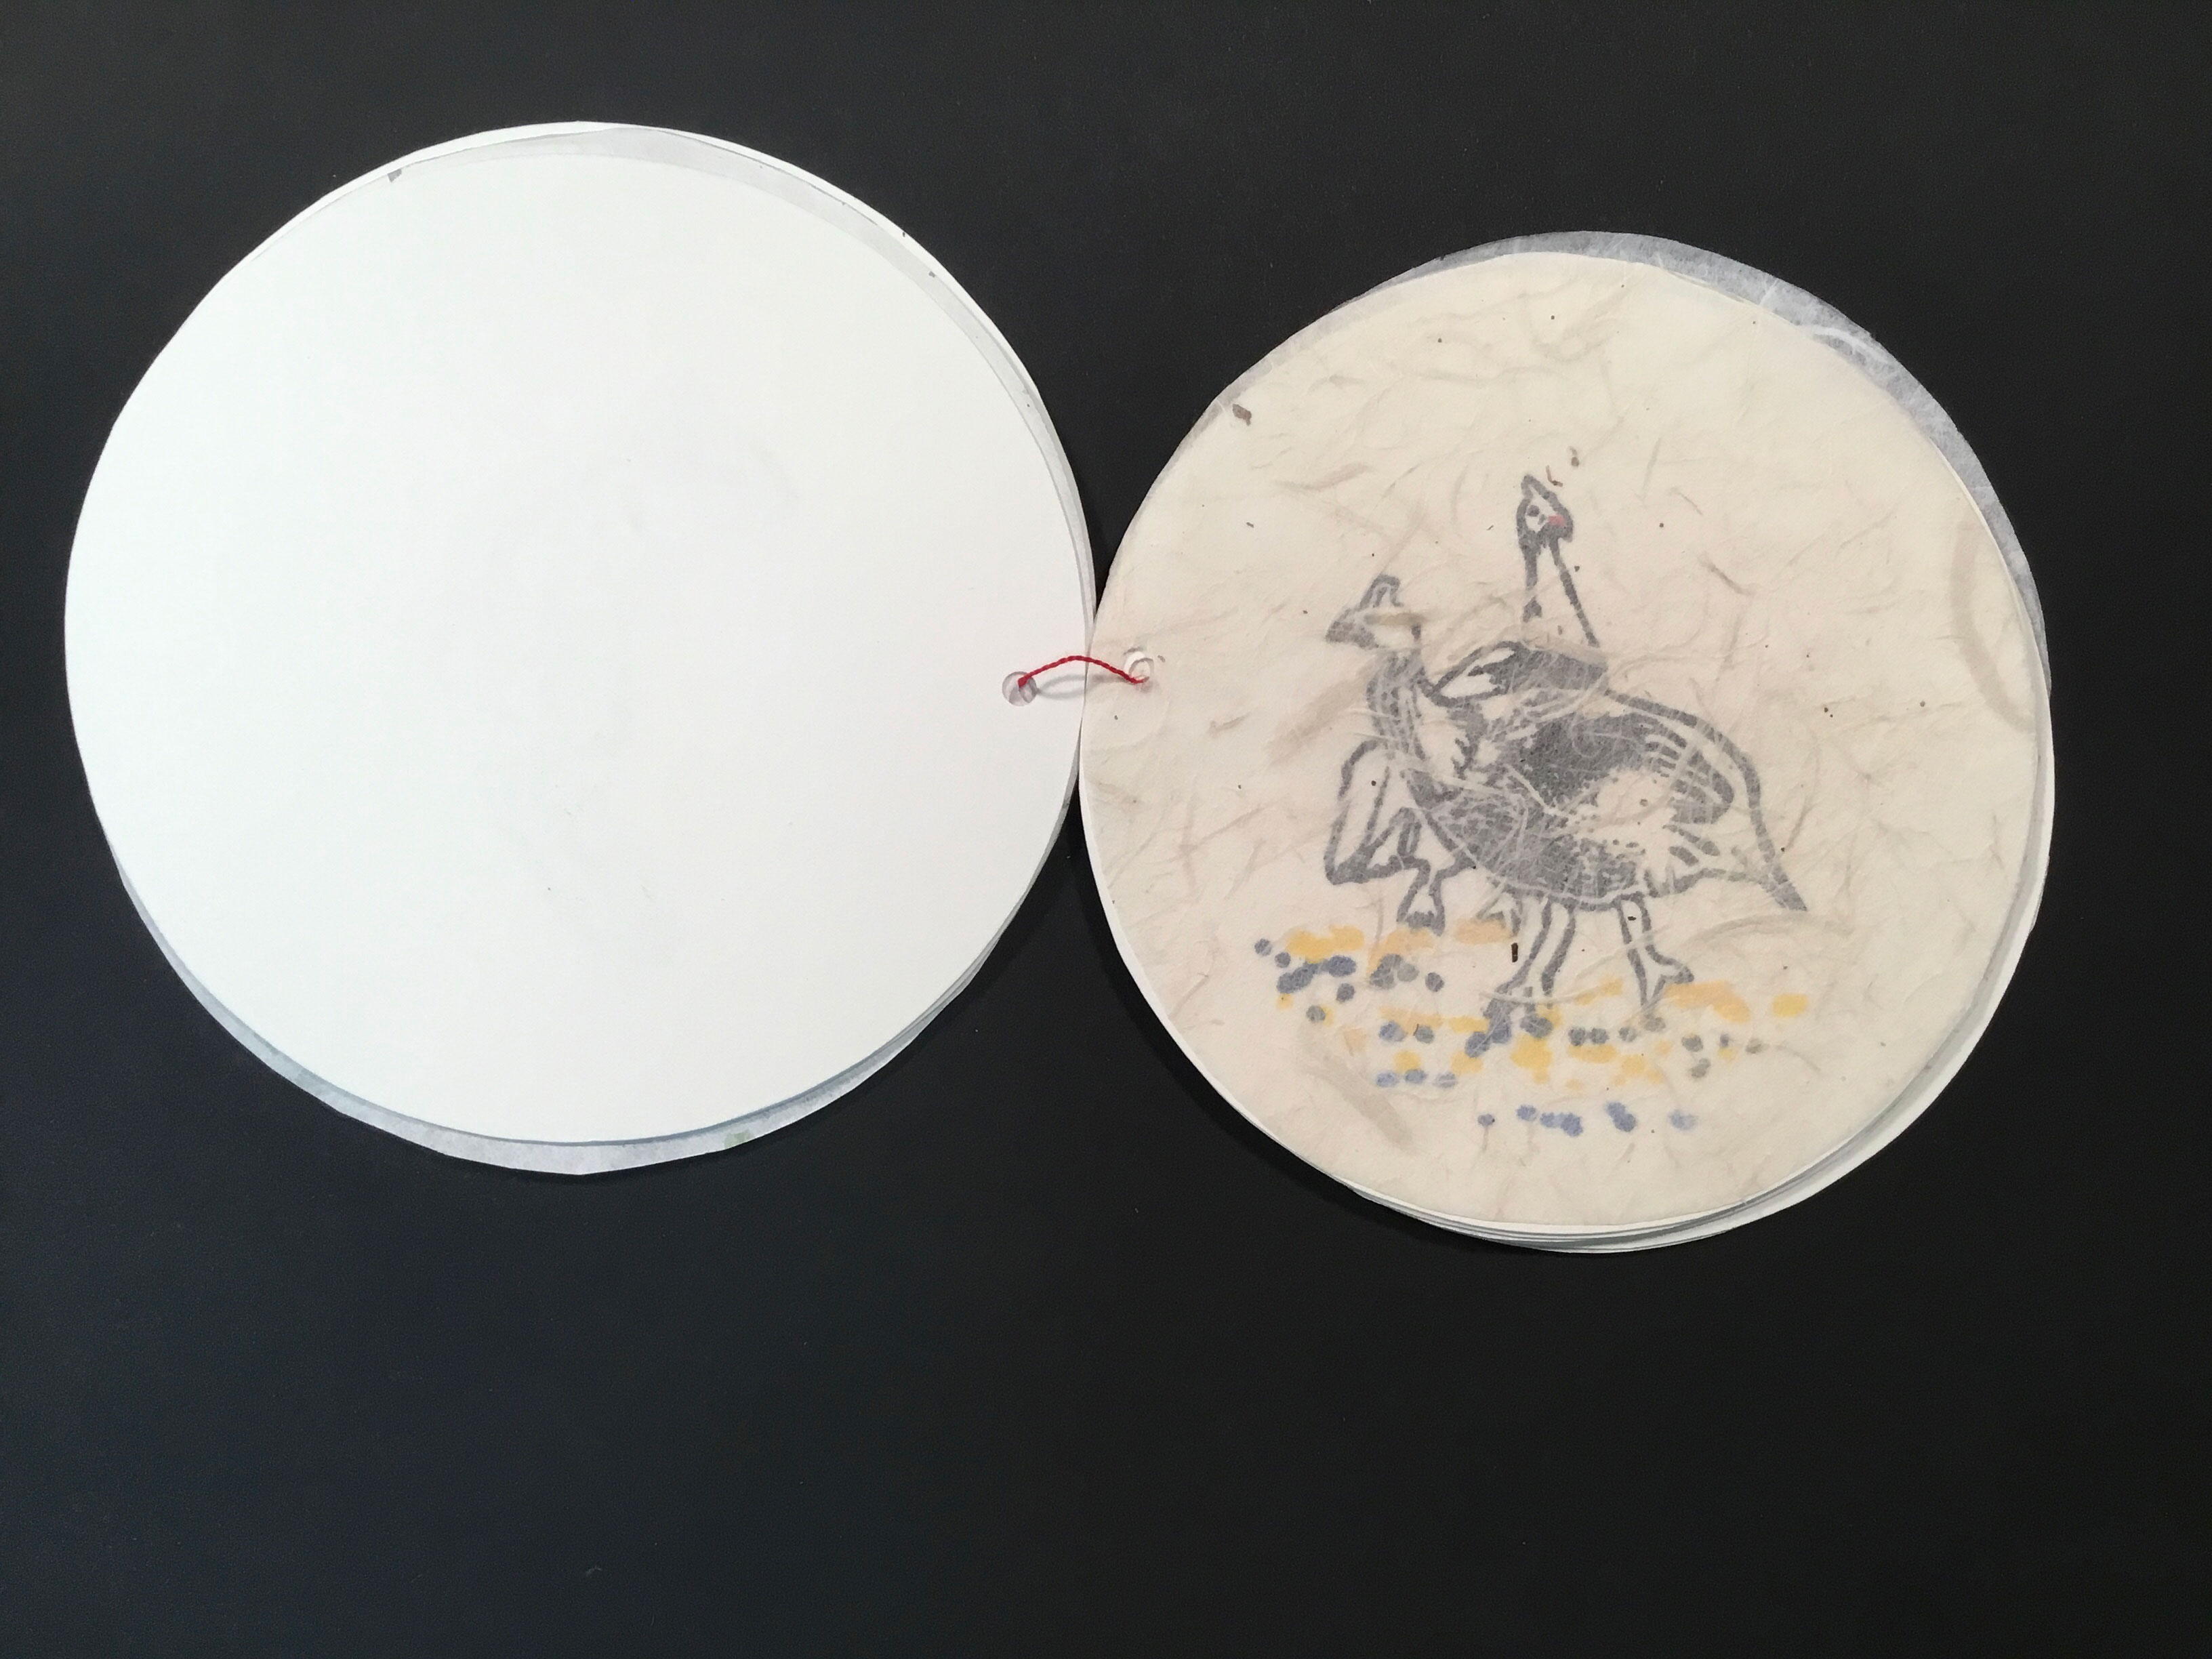 A thin, circular sheet of translucent paper with floral and plant-like embeds covers a painted image of two wild turkeys standing on yellow and black dots.